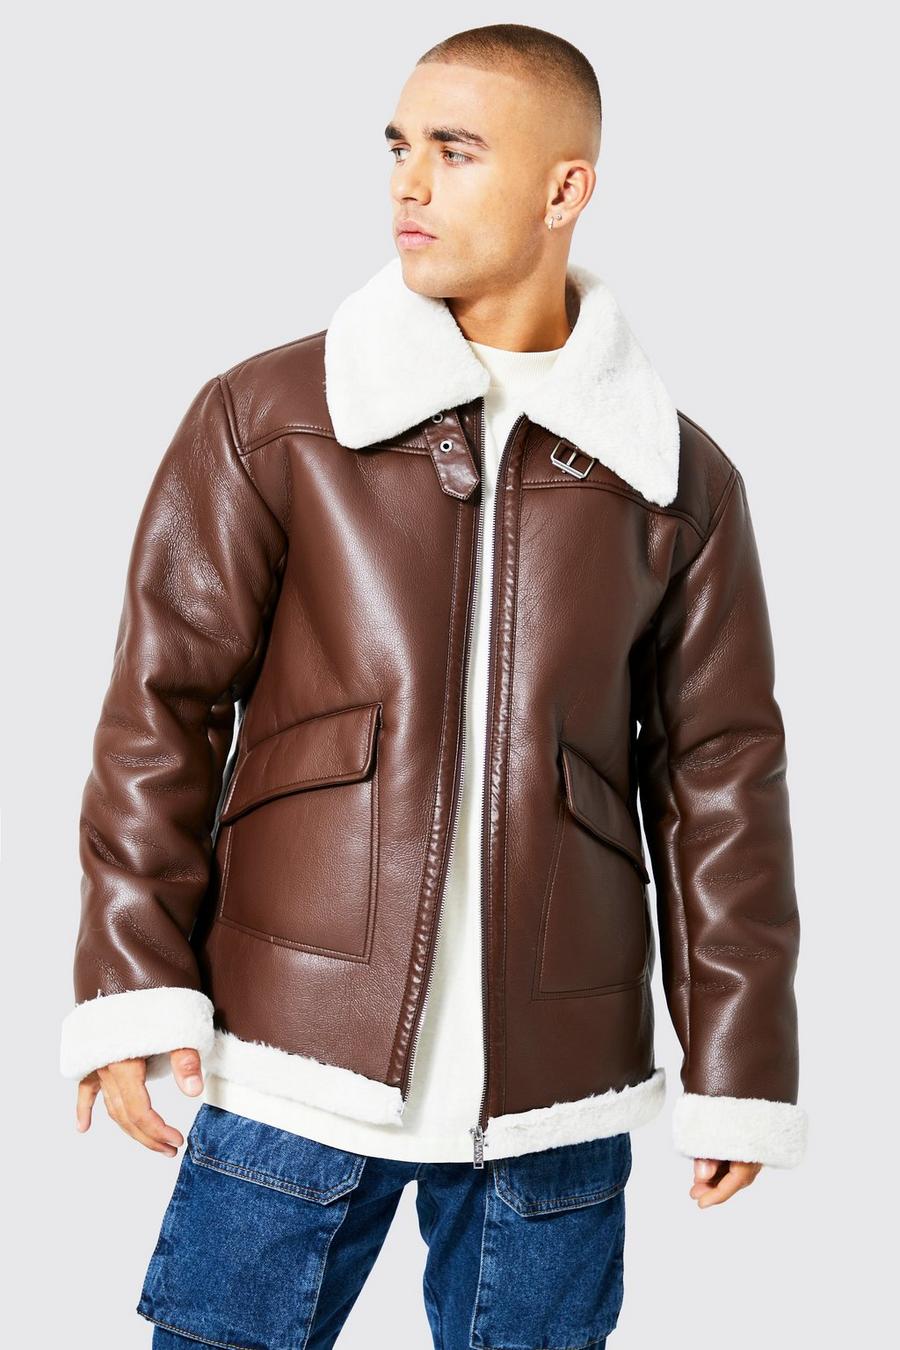 Chocolate marron Oversized Leather Look Aviator With Wide Borg Collar